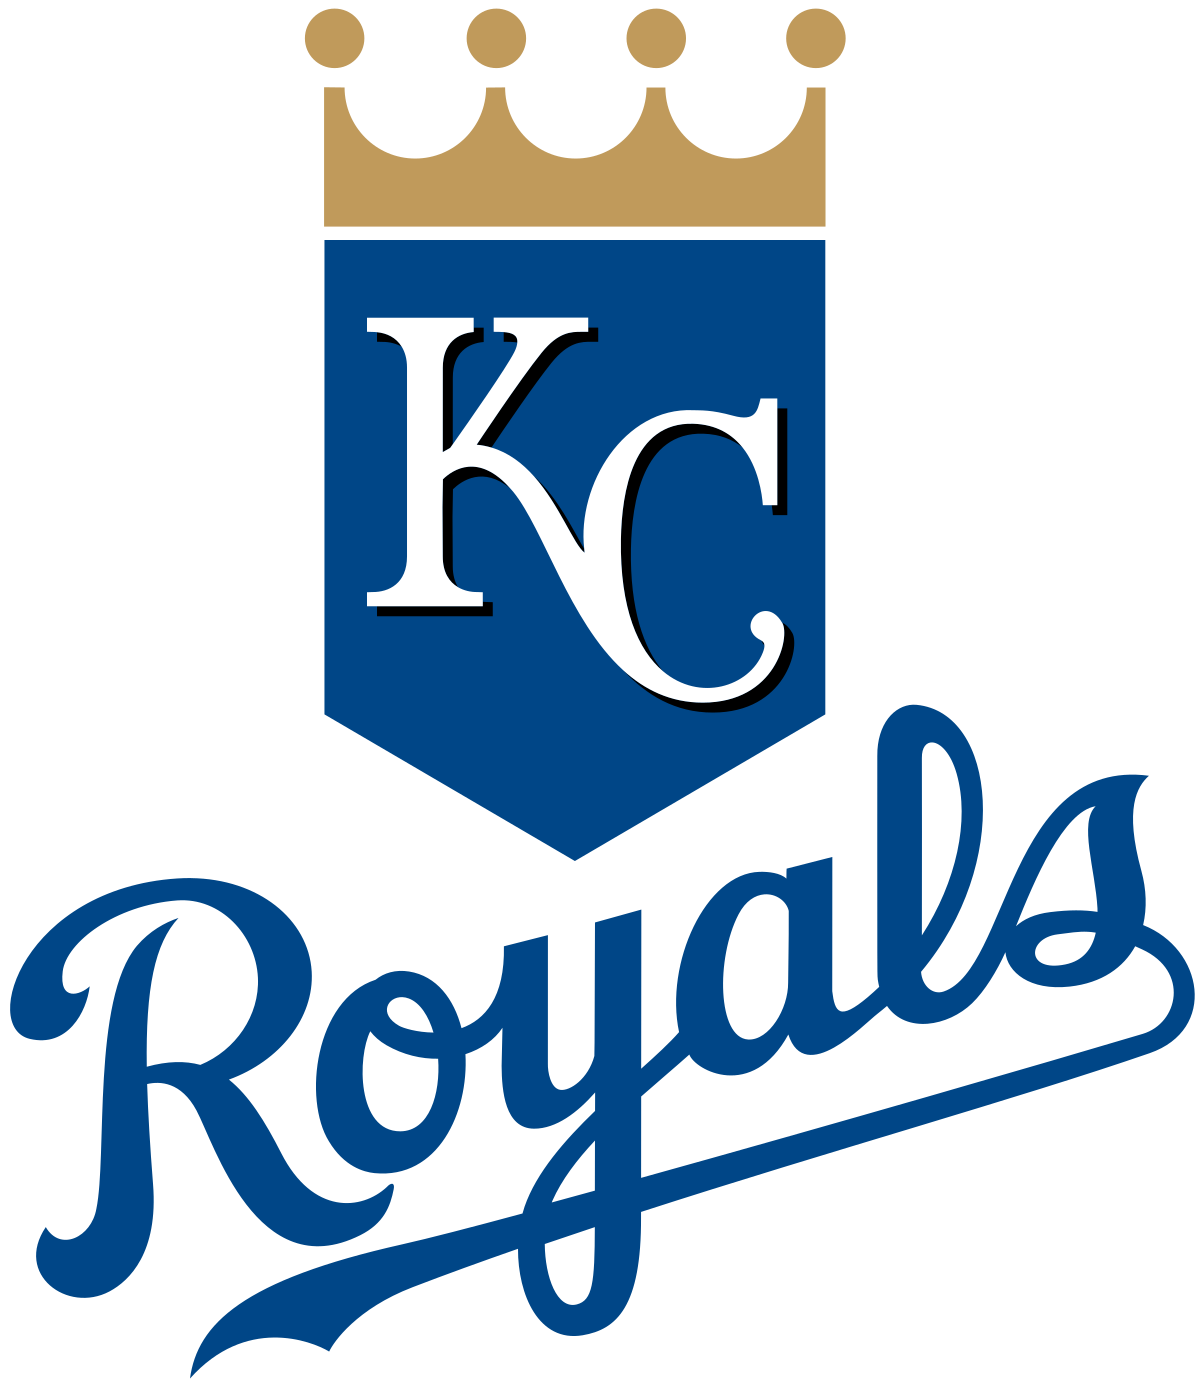 Kansas City Royals unveil new 'City of Fountains' City Connect